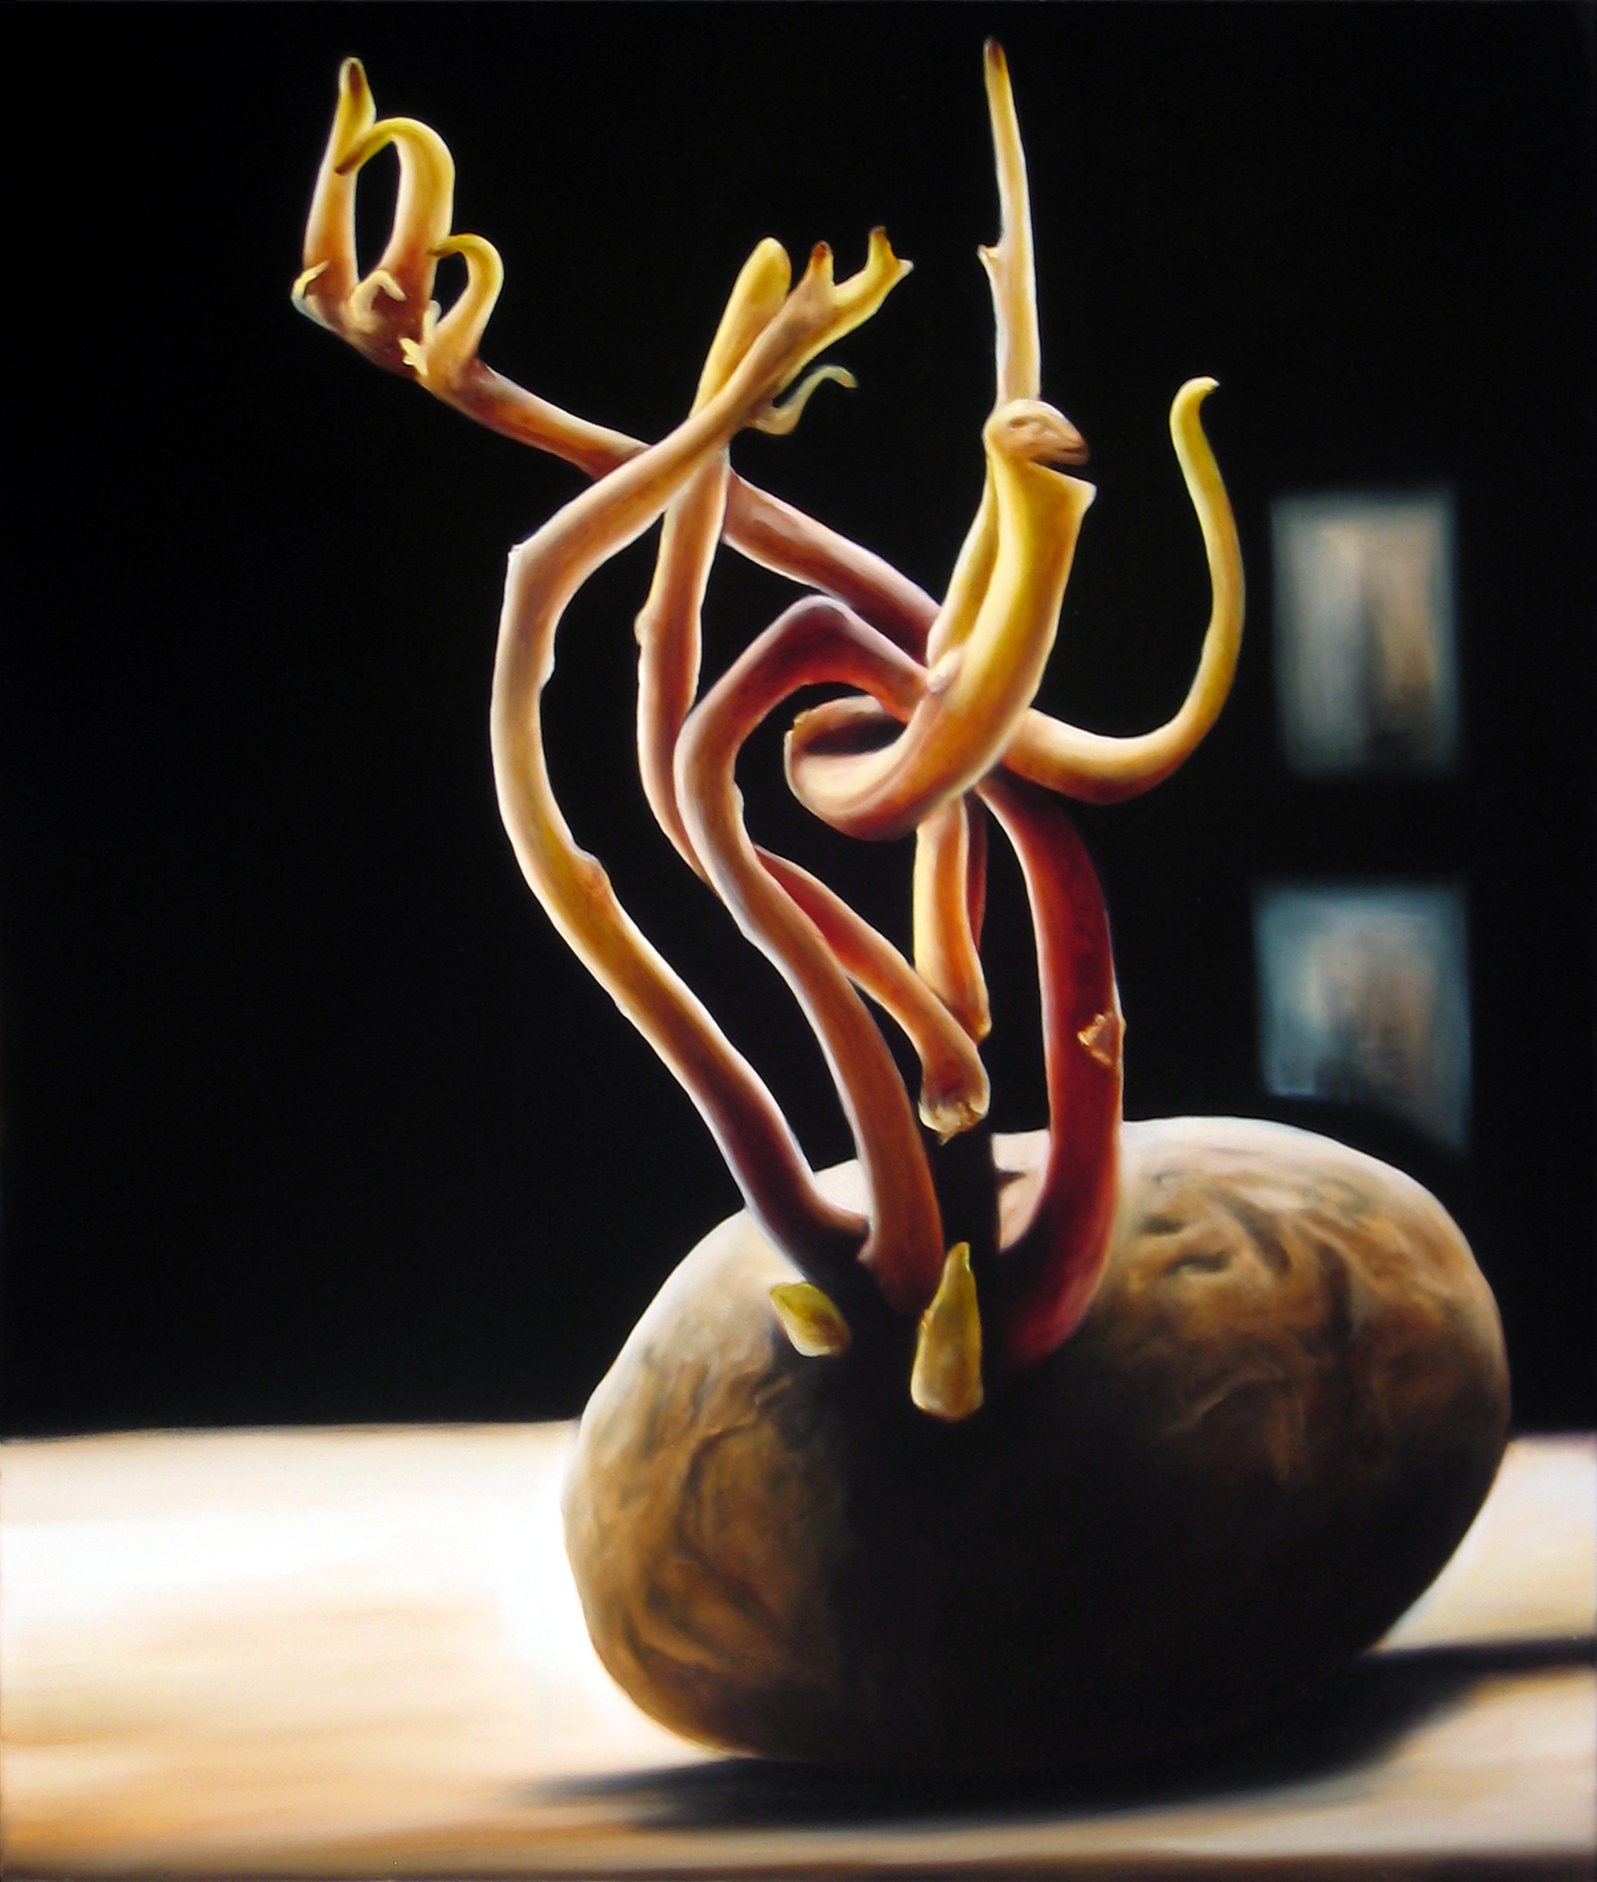 Introverted-Tease, 40" x 34", Oil on Canvas, 2006